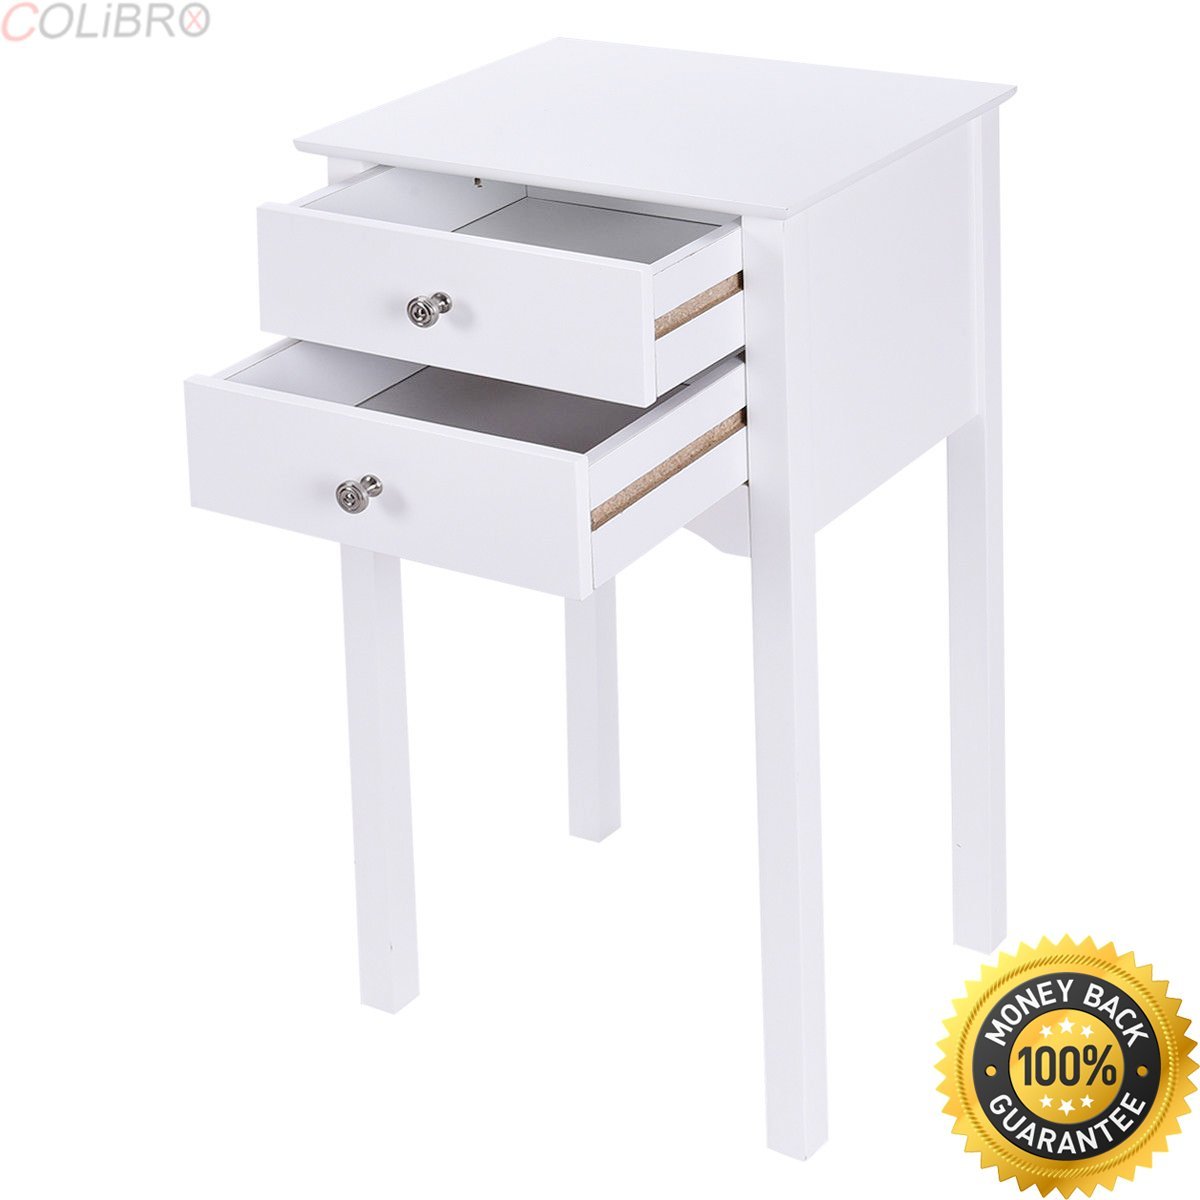 drawer night stands find accent table target get quotations colibrox pcs side end stand drawers white bedside cabinets round nightstand dining room chairs changing dresser lamp